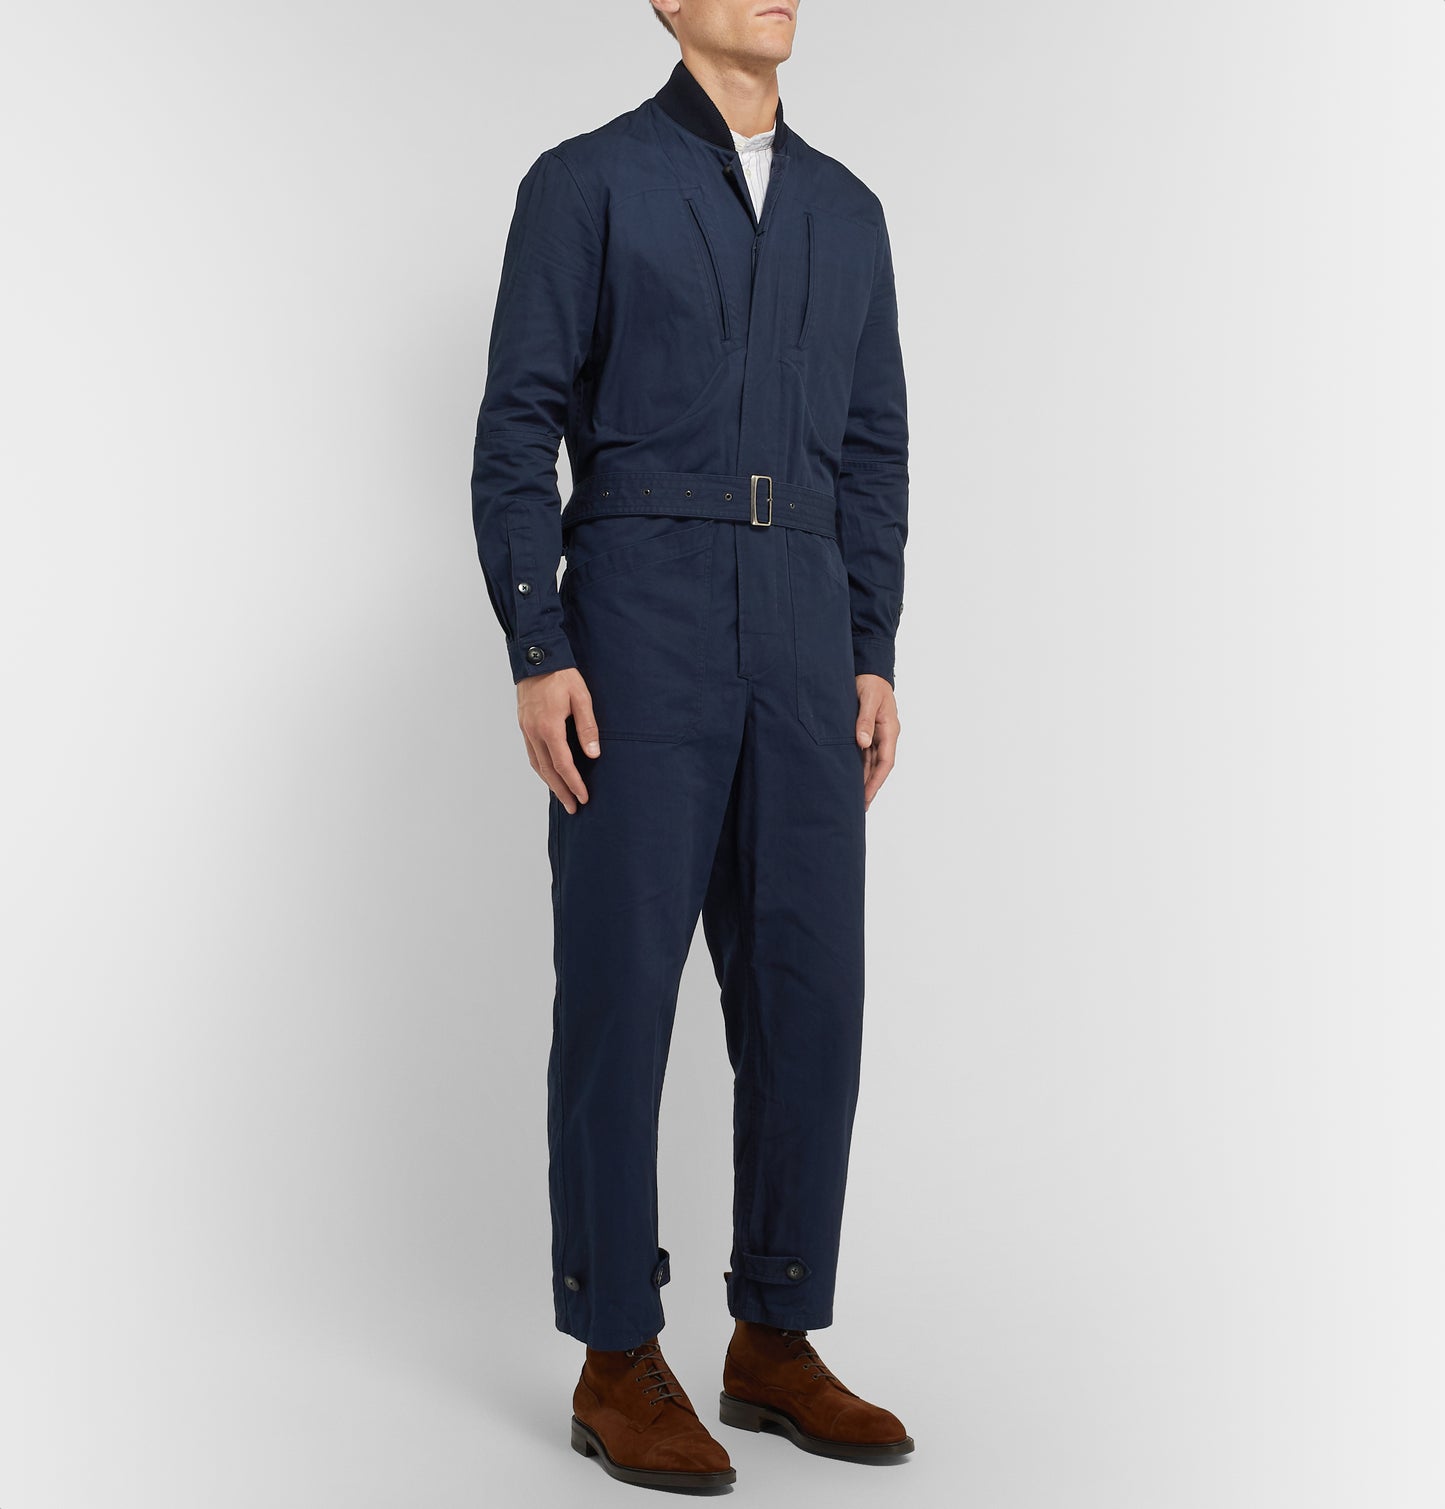 Goodwood Connolly Racing Overalls Navy